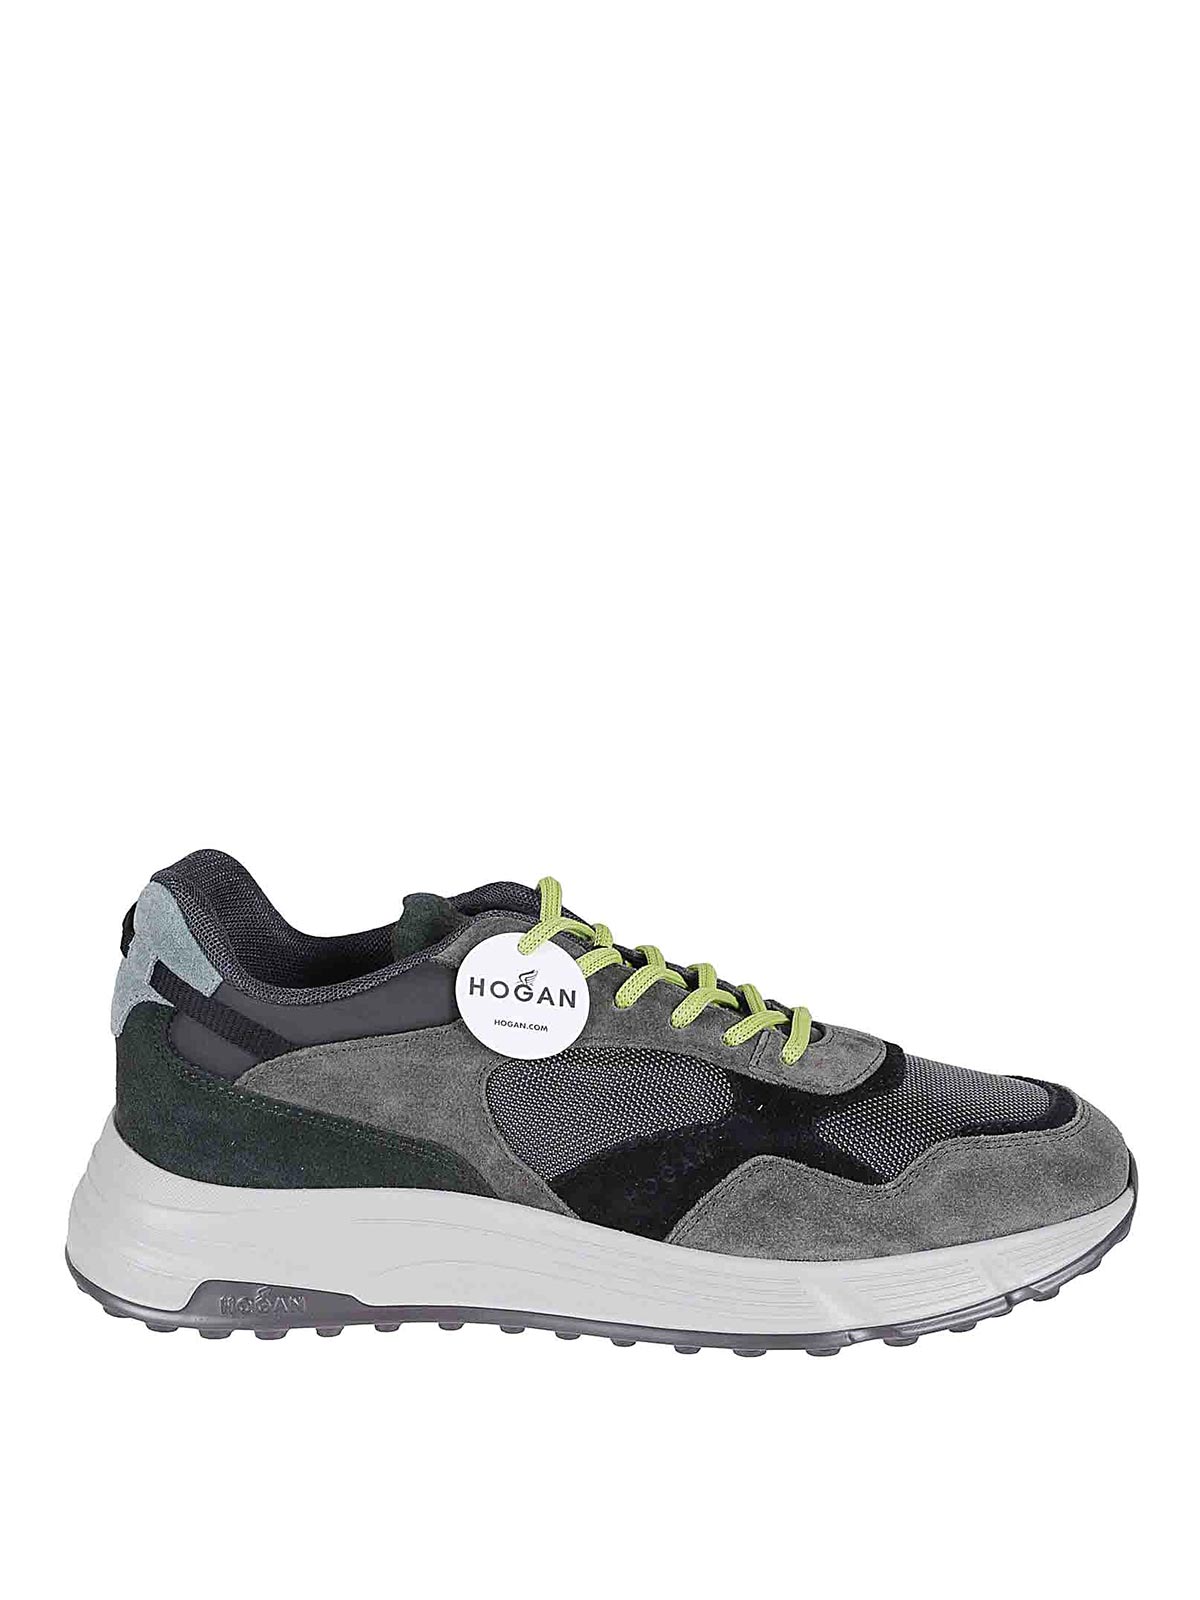 Hogan H563 Trainers In Green